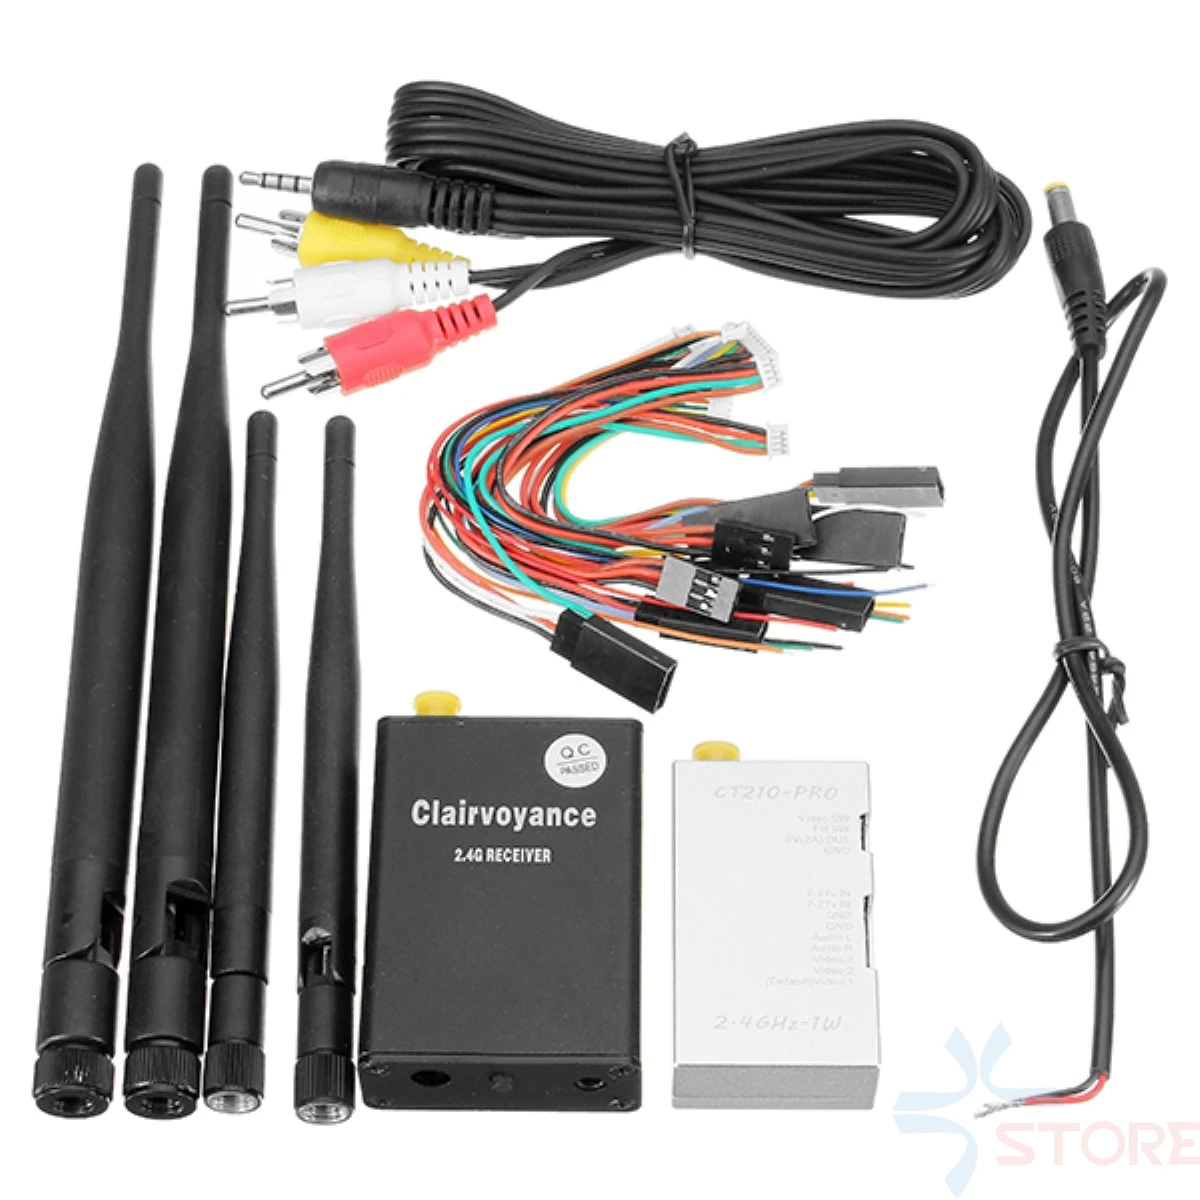 50KM Long Range CT210-PRO CR800 2.4GHz 2.4G 1000mW Transmitter Receiver Combo for FPV Racing 1